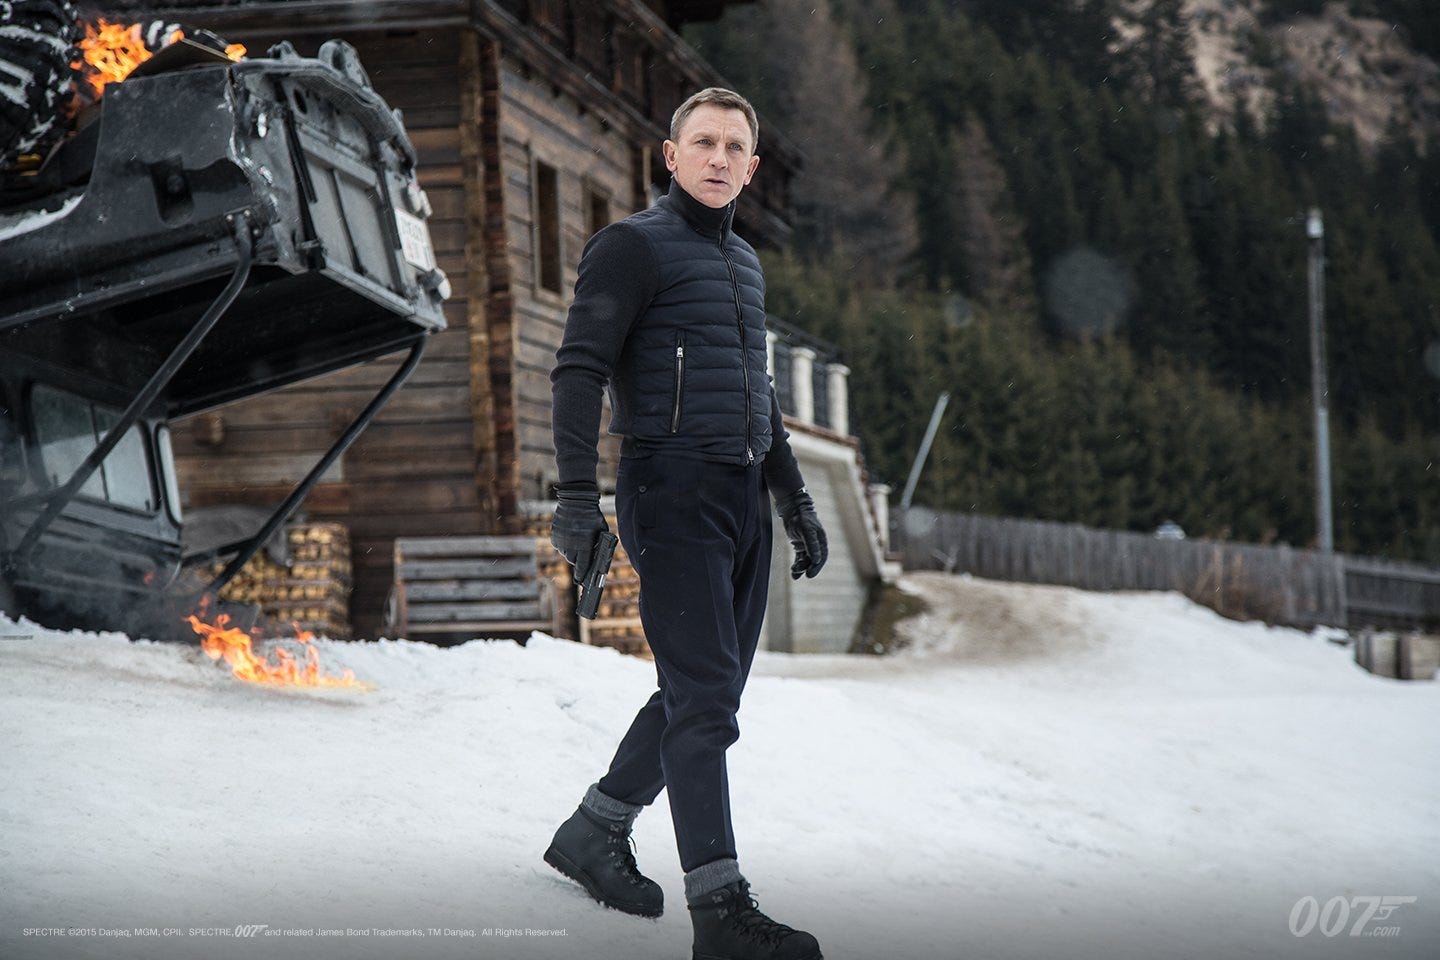 James Bond on X: "#SPECTRE Costume Designer Jany Temime on Bond's outfit:  “It has an army background, inspired by Chasseurs Alpins"  https://t.co/UnNmcoenVs" / X